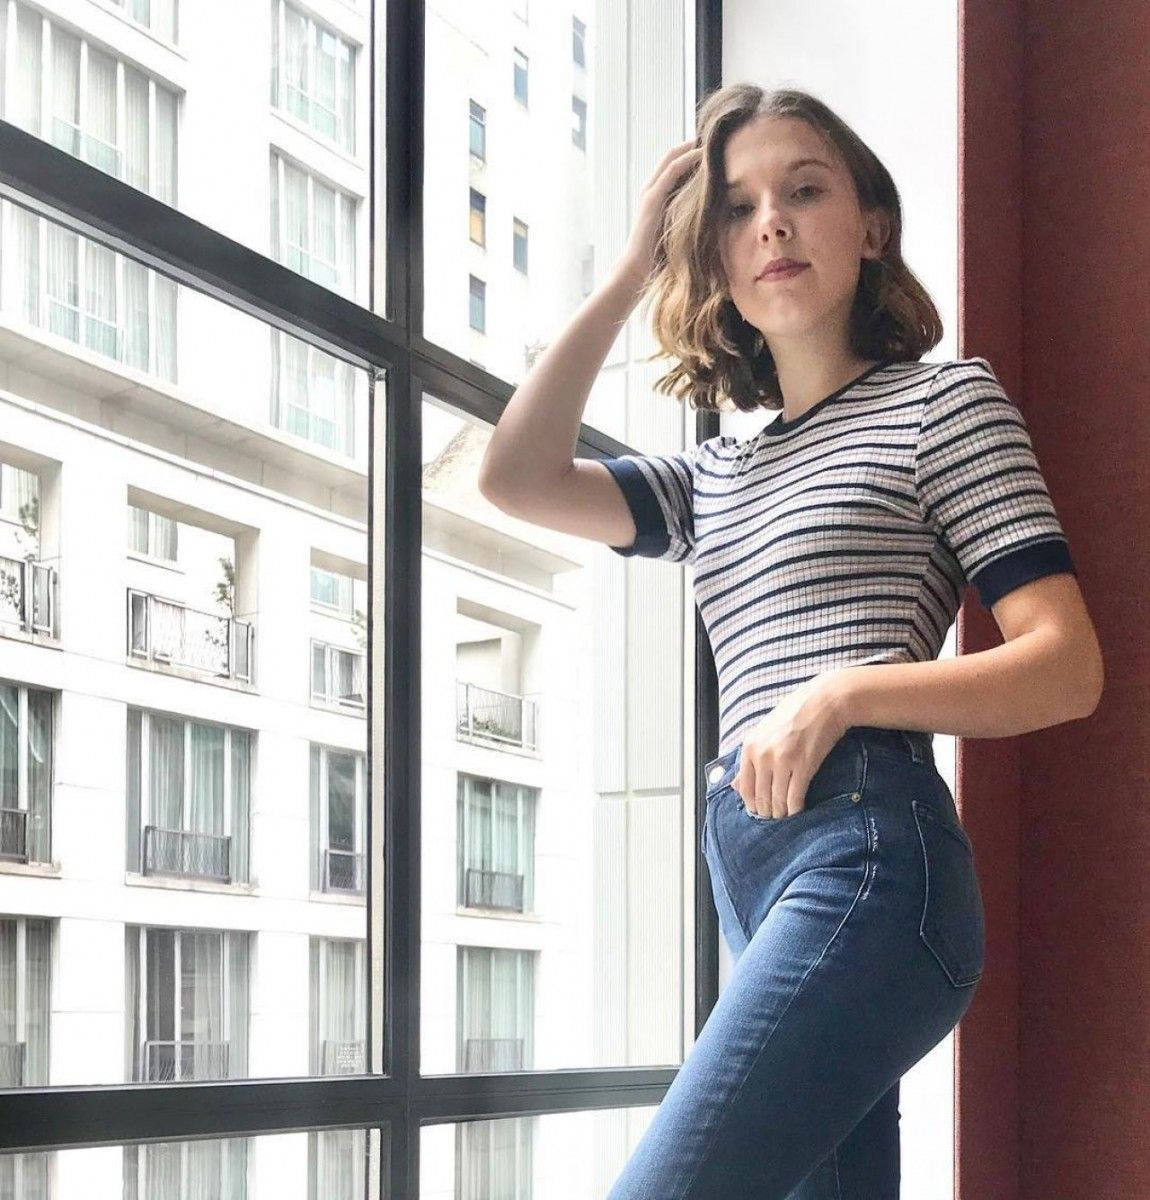 Millie Bobby Brown Rocking A Cool And Casual Look. Background